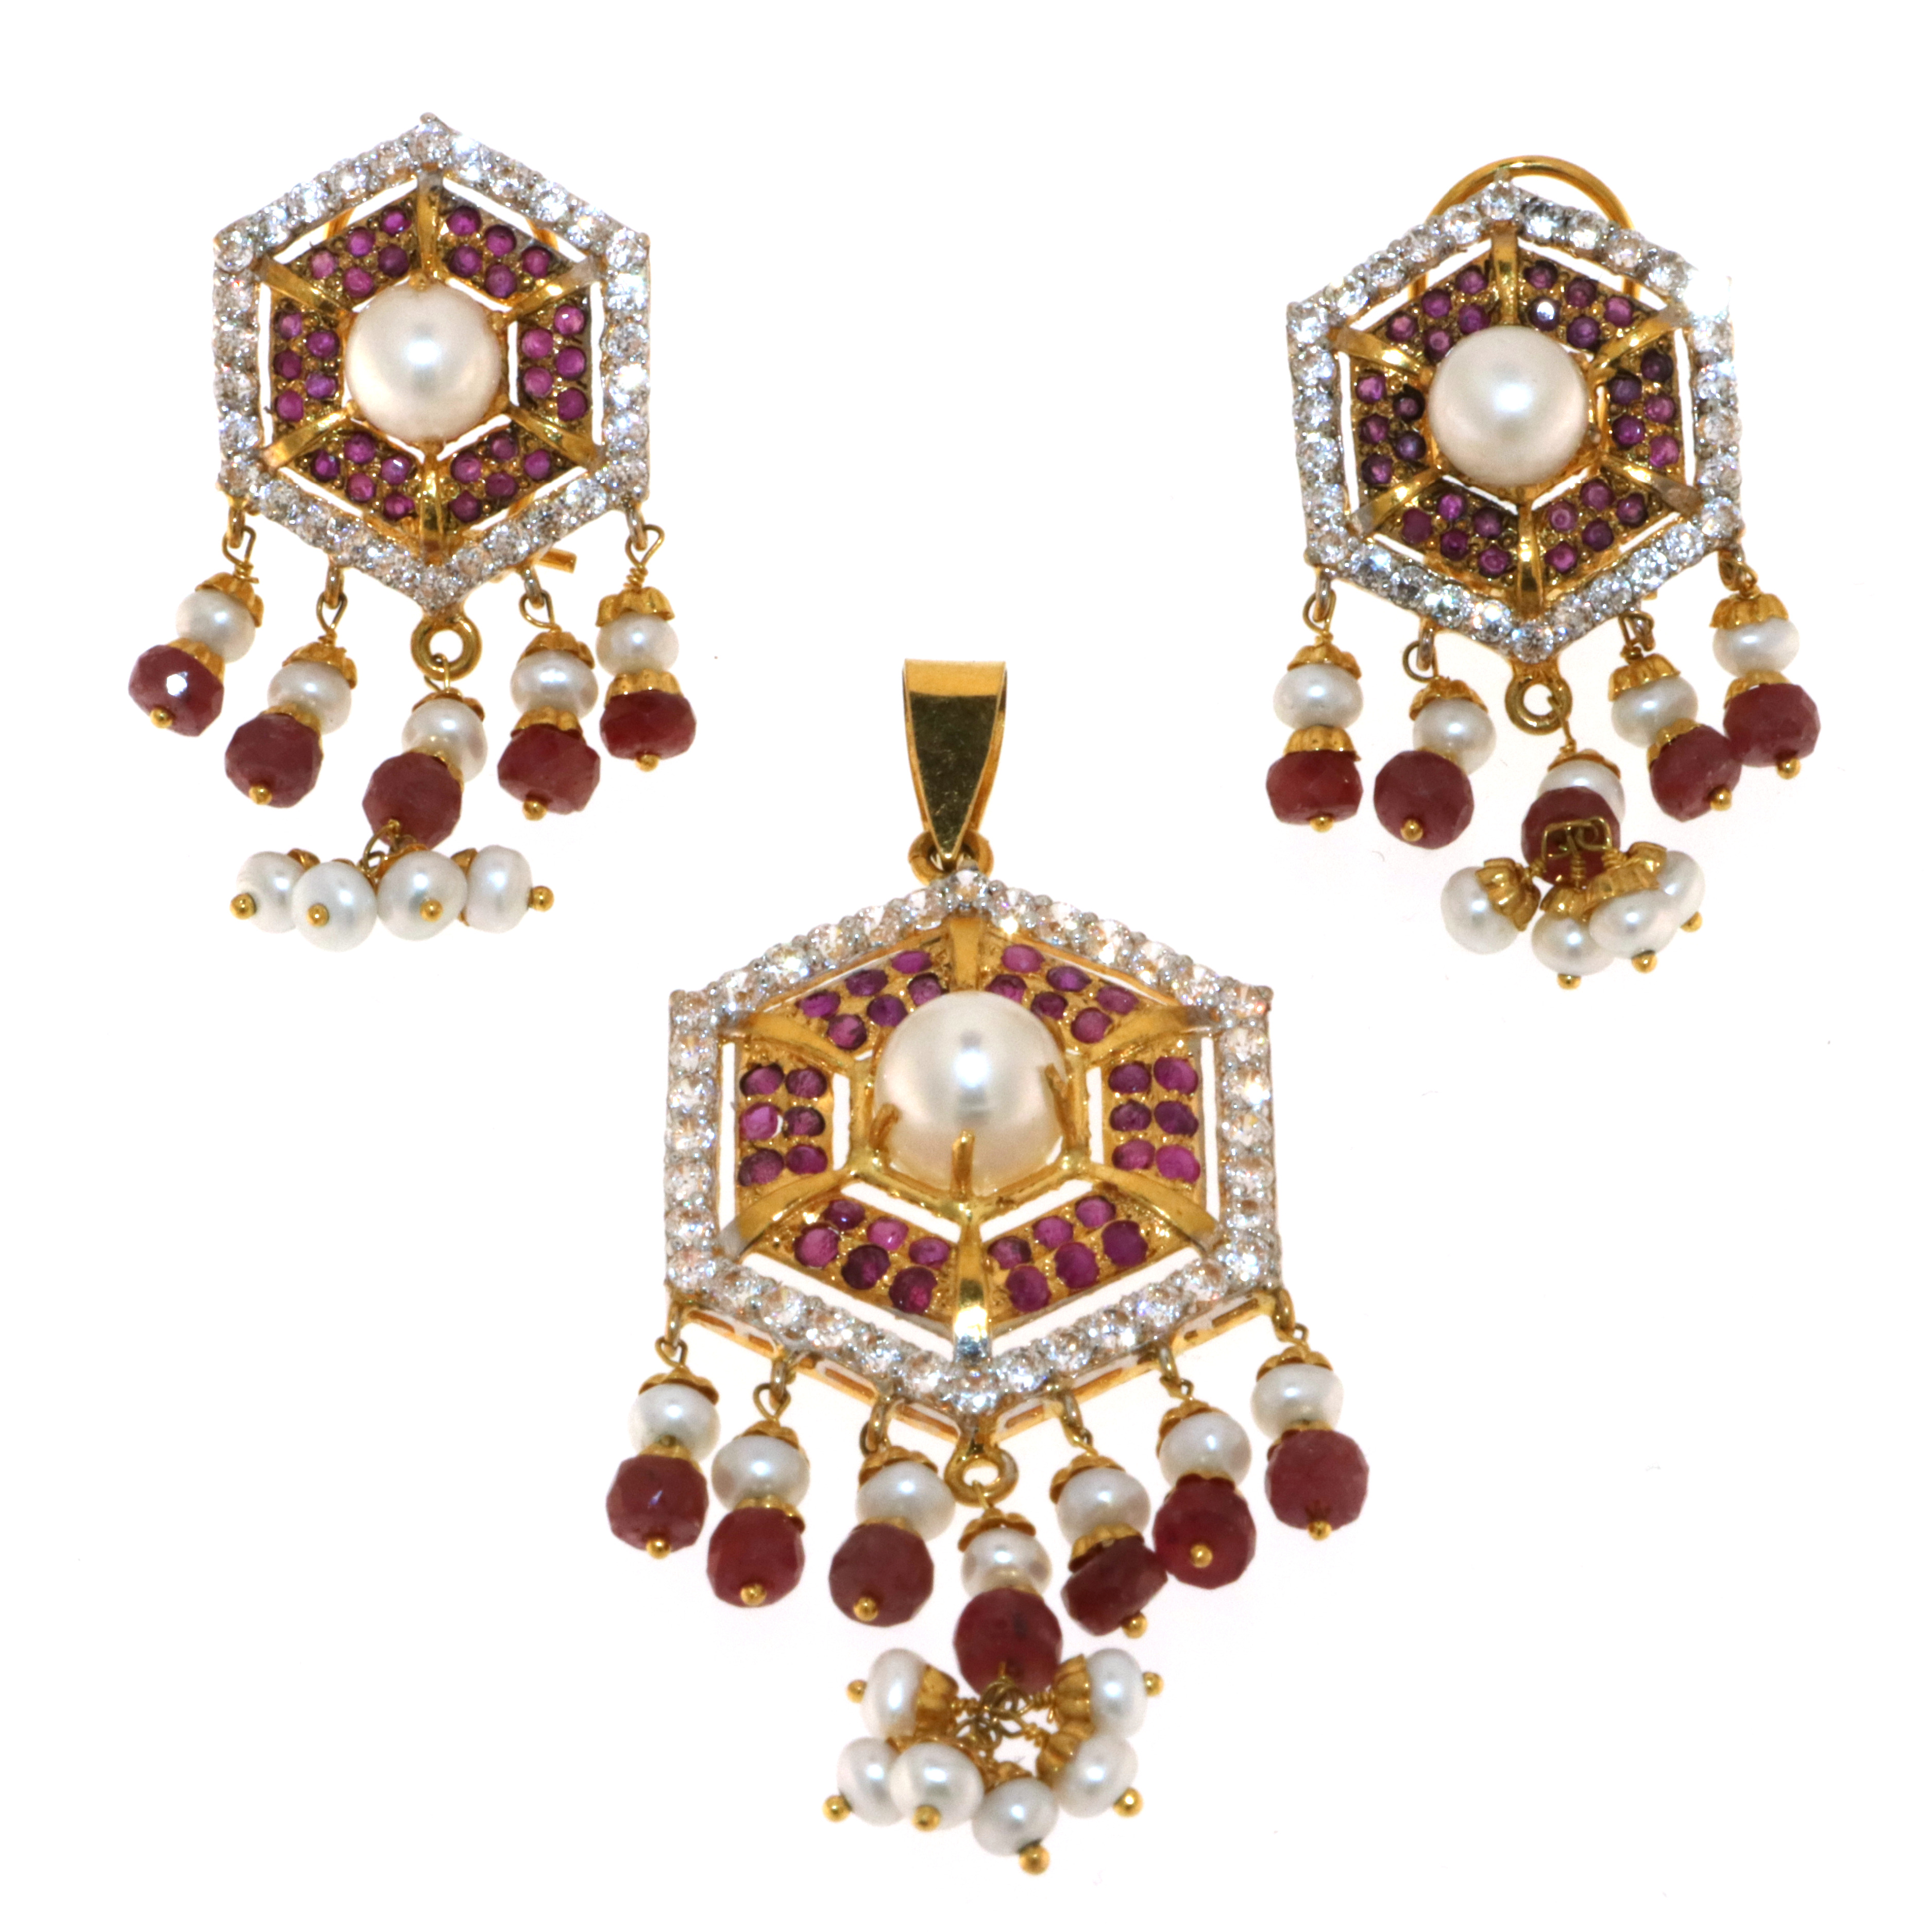 22ct Real Gold Asian/Indian/Pakistani Style Pendant Set ROYAL COLLECTION